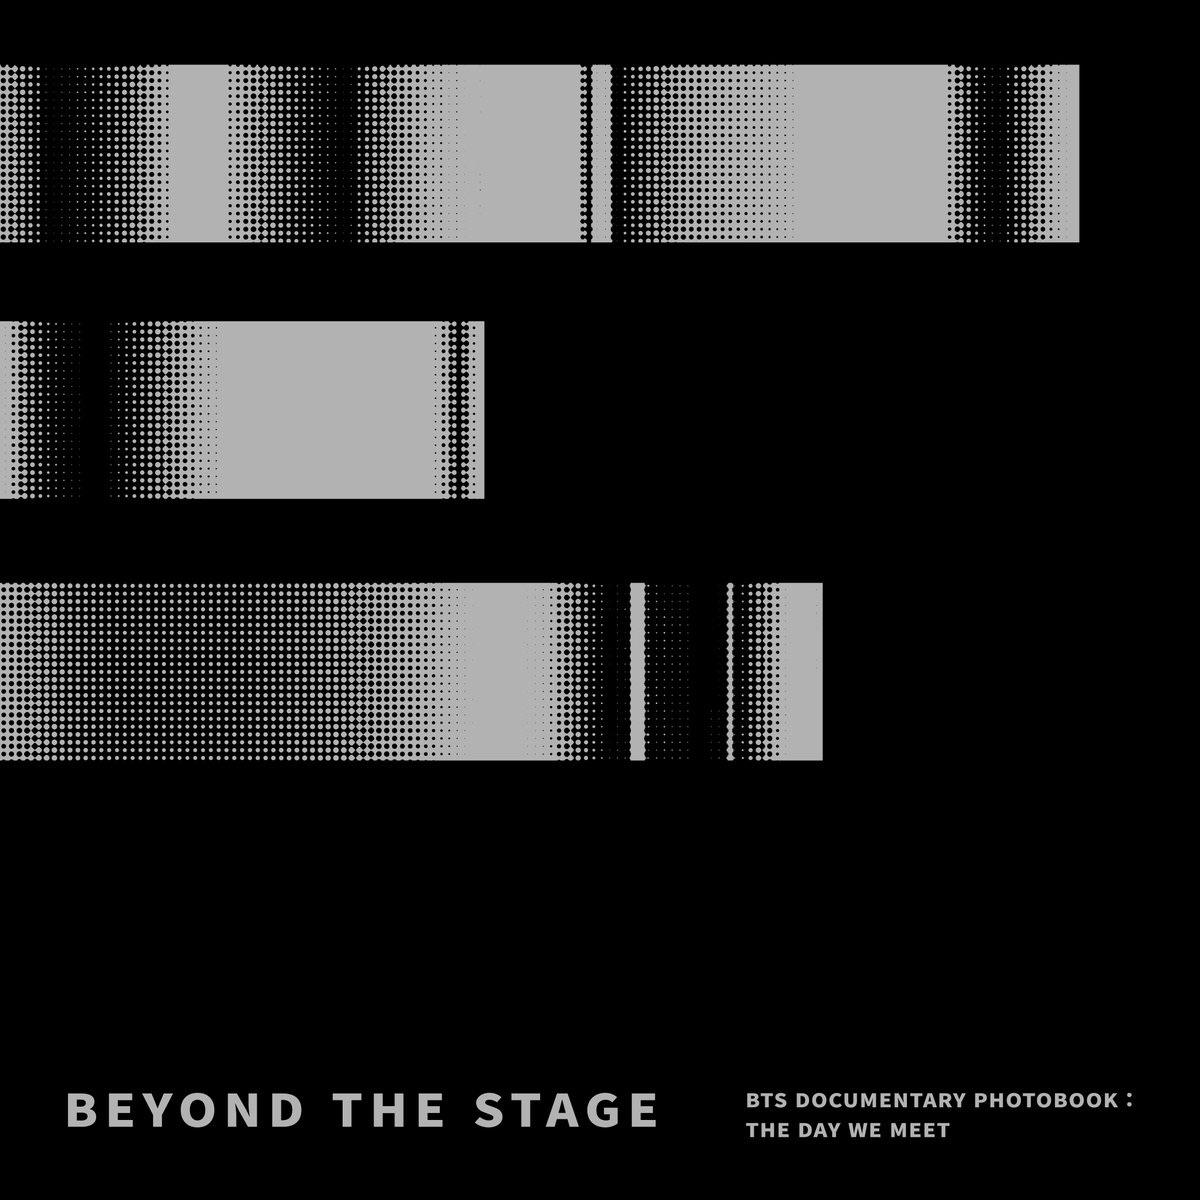 BEYOND THE STAGE’ BTS DOCUMENTARY PHOTOBOOK : THE DAY WE MEET Poster - 131223